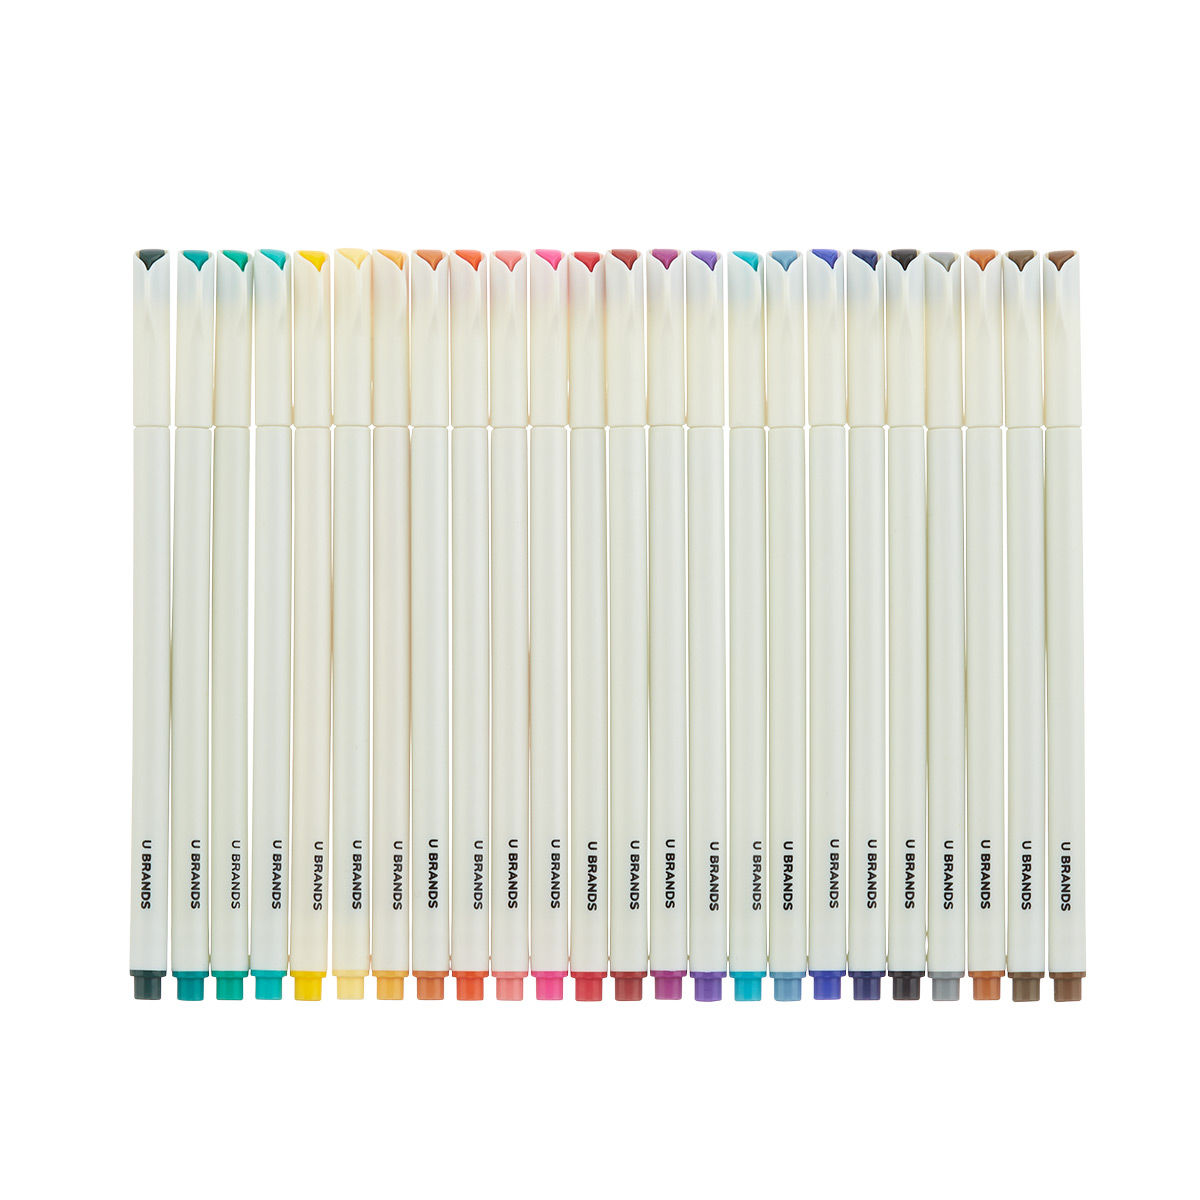 https://www.containerstore.com/catalogimages/409035/10083647_felt_tipped_pens_assorted_p.jpg